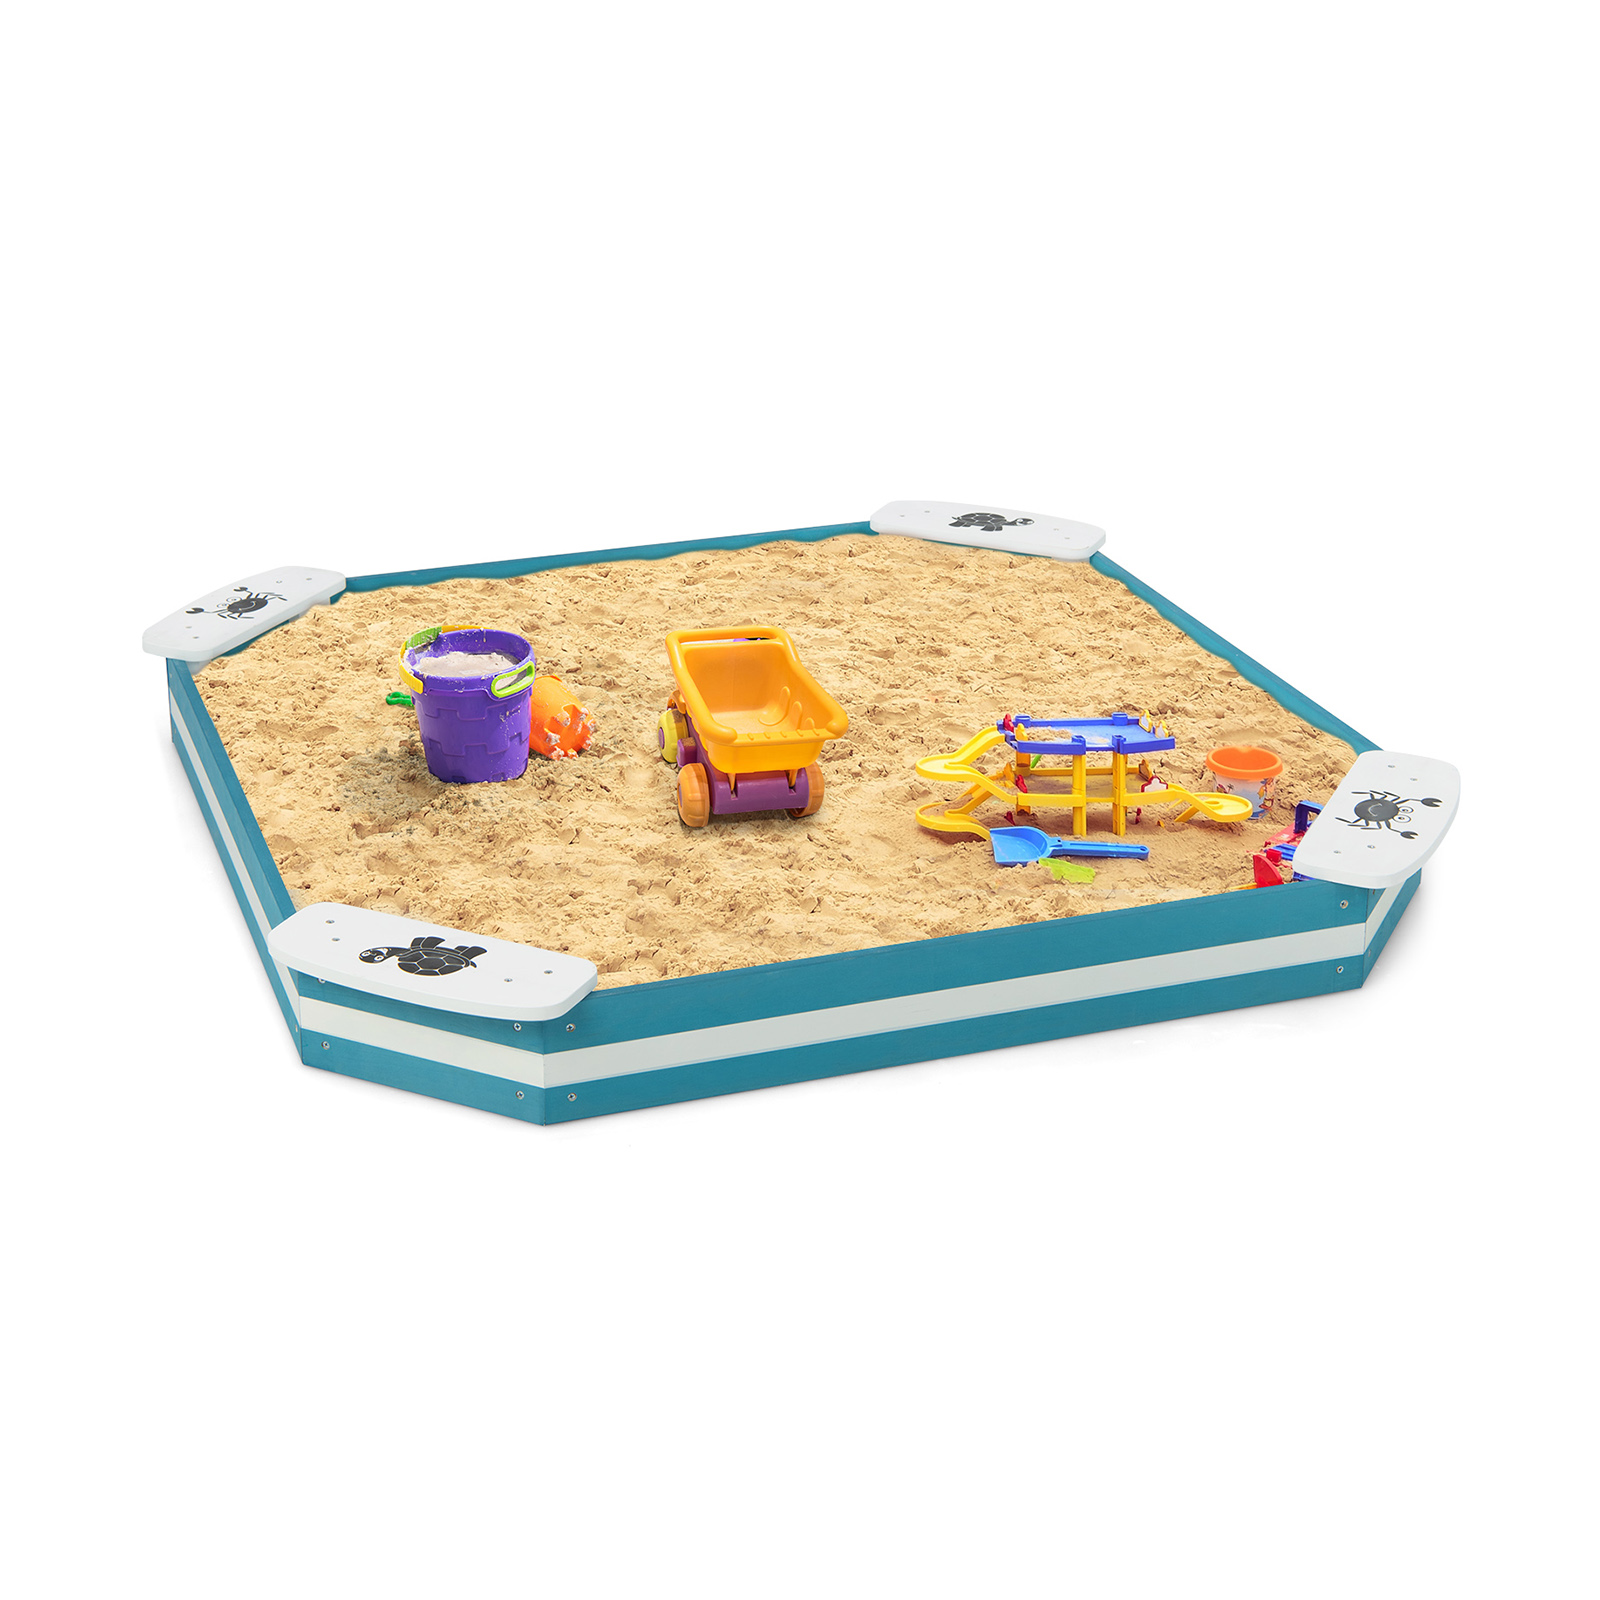 Kids Wooden Sandbox with 4 Built-in Seats for Backyard Sand Play